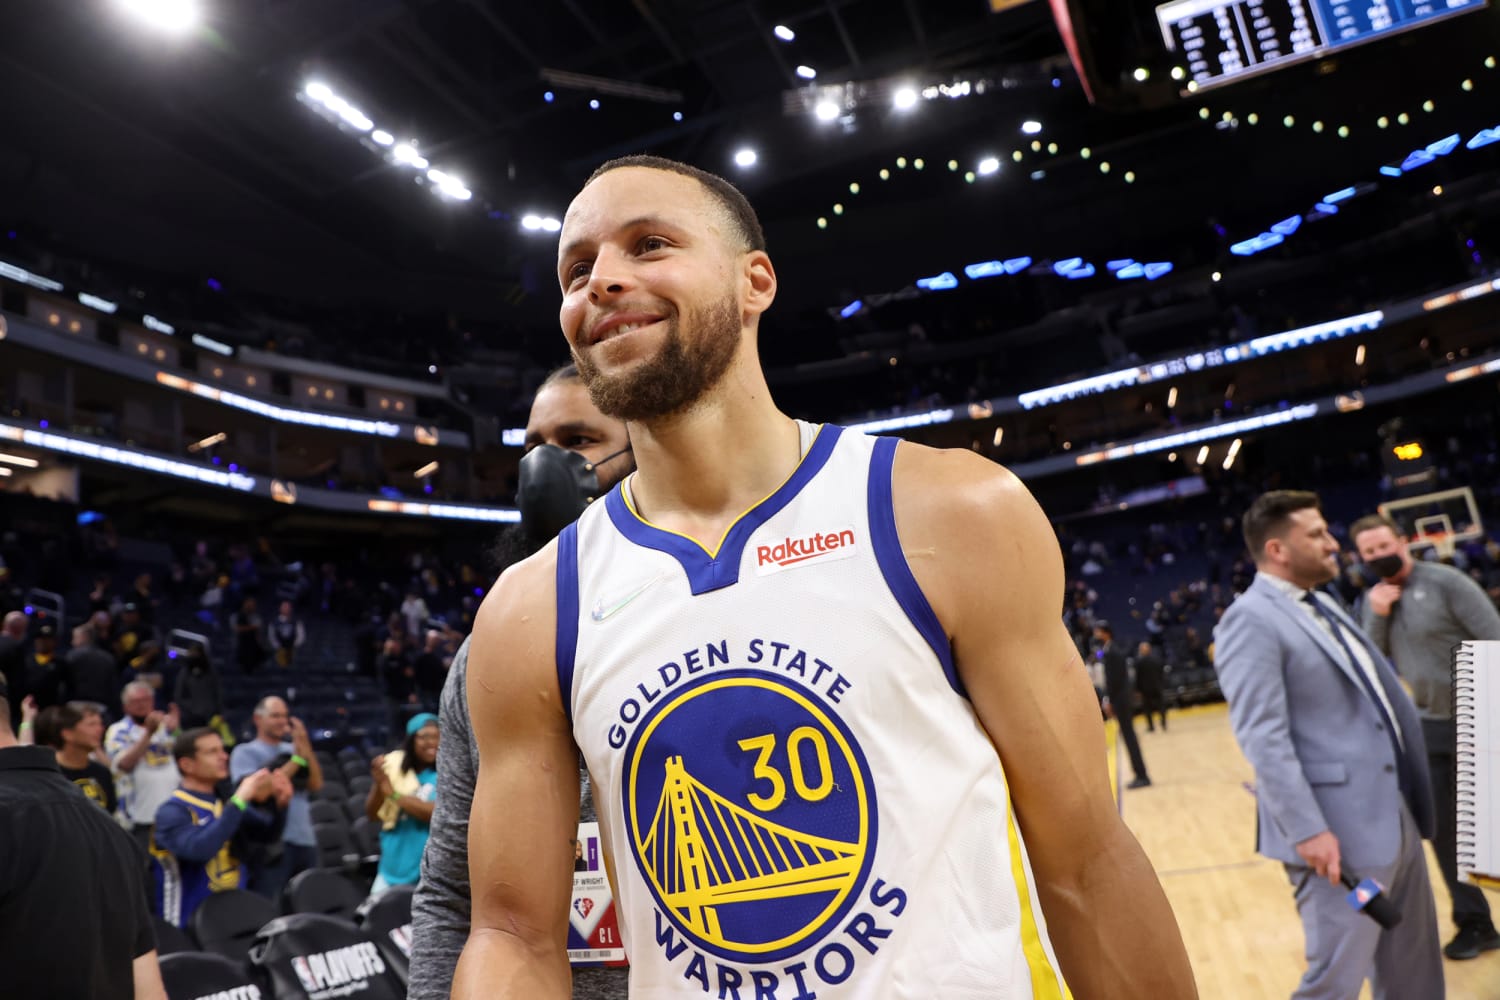 We got it done!': Stephen Curry celebrates becoming a college grad